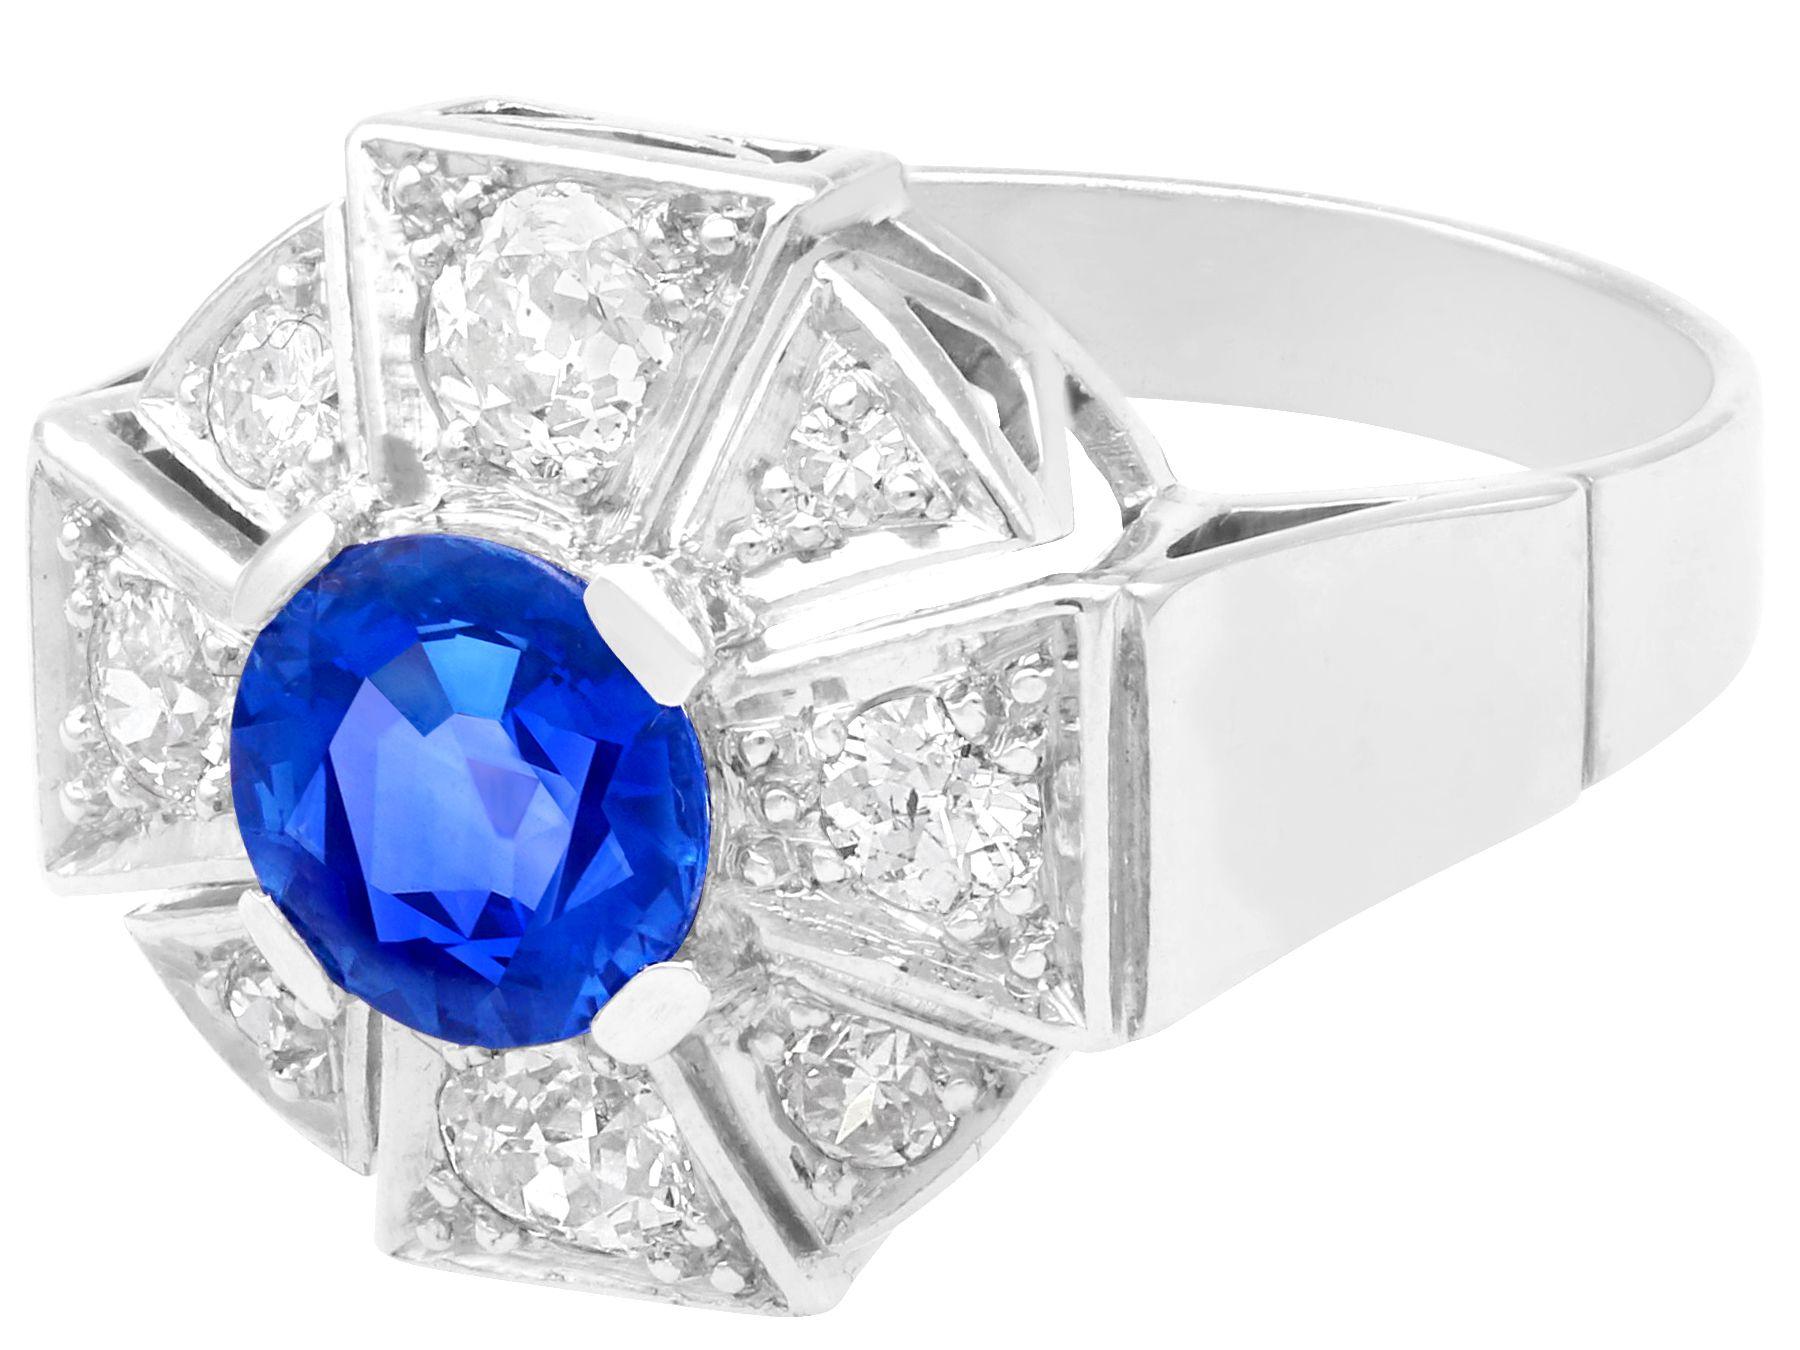 1.69 Carat Burmese Sapphire and 1.15 Carat Diamond White Gold Cocktail Ring In Excellent Condition For Sale In Jesmond, Newcastle Upon Tyne